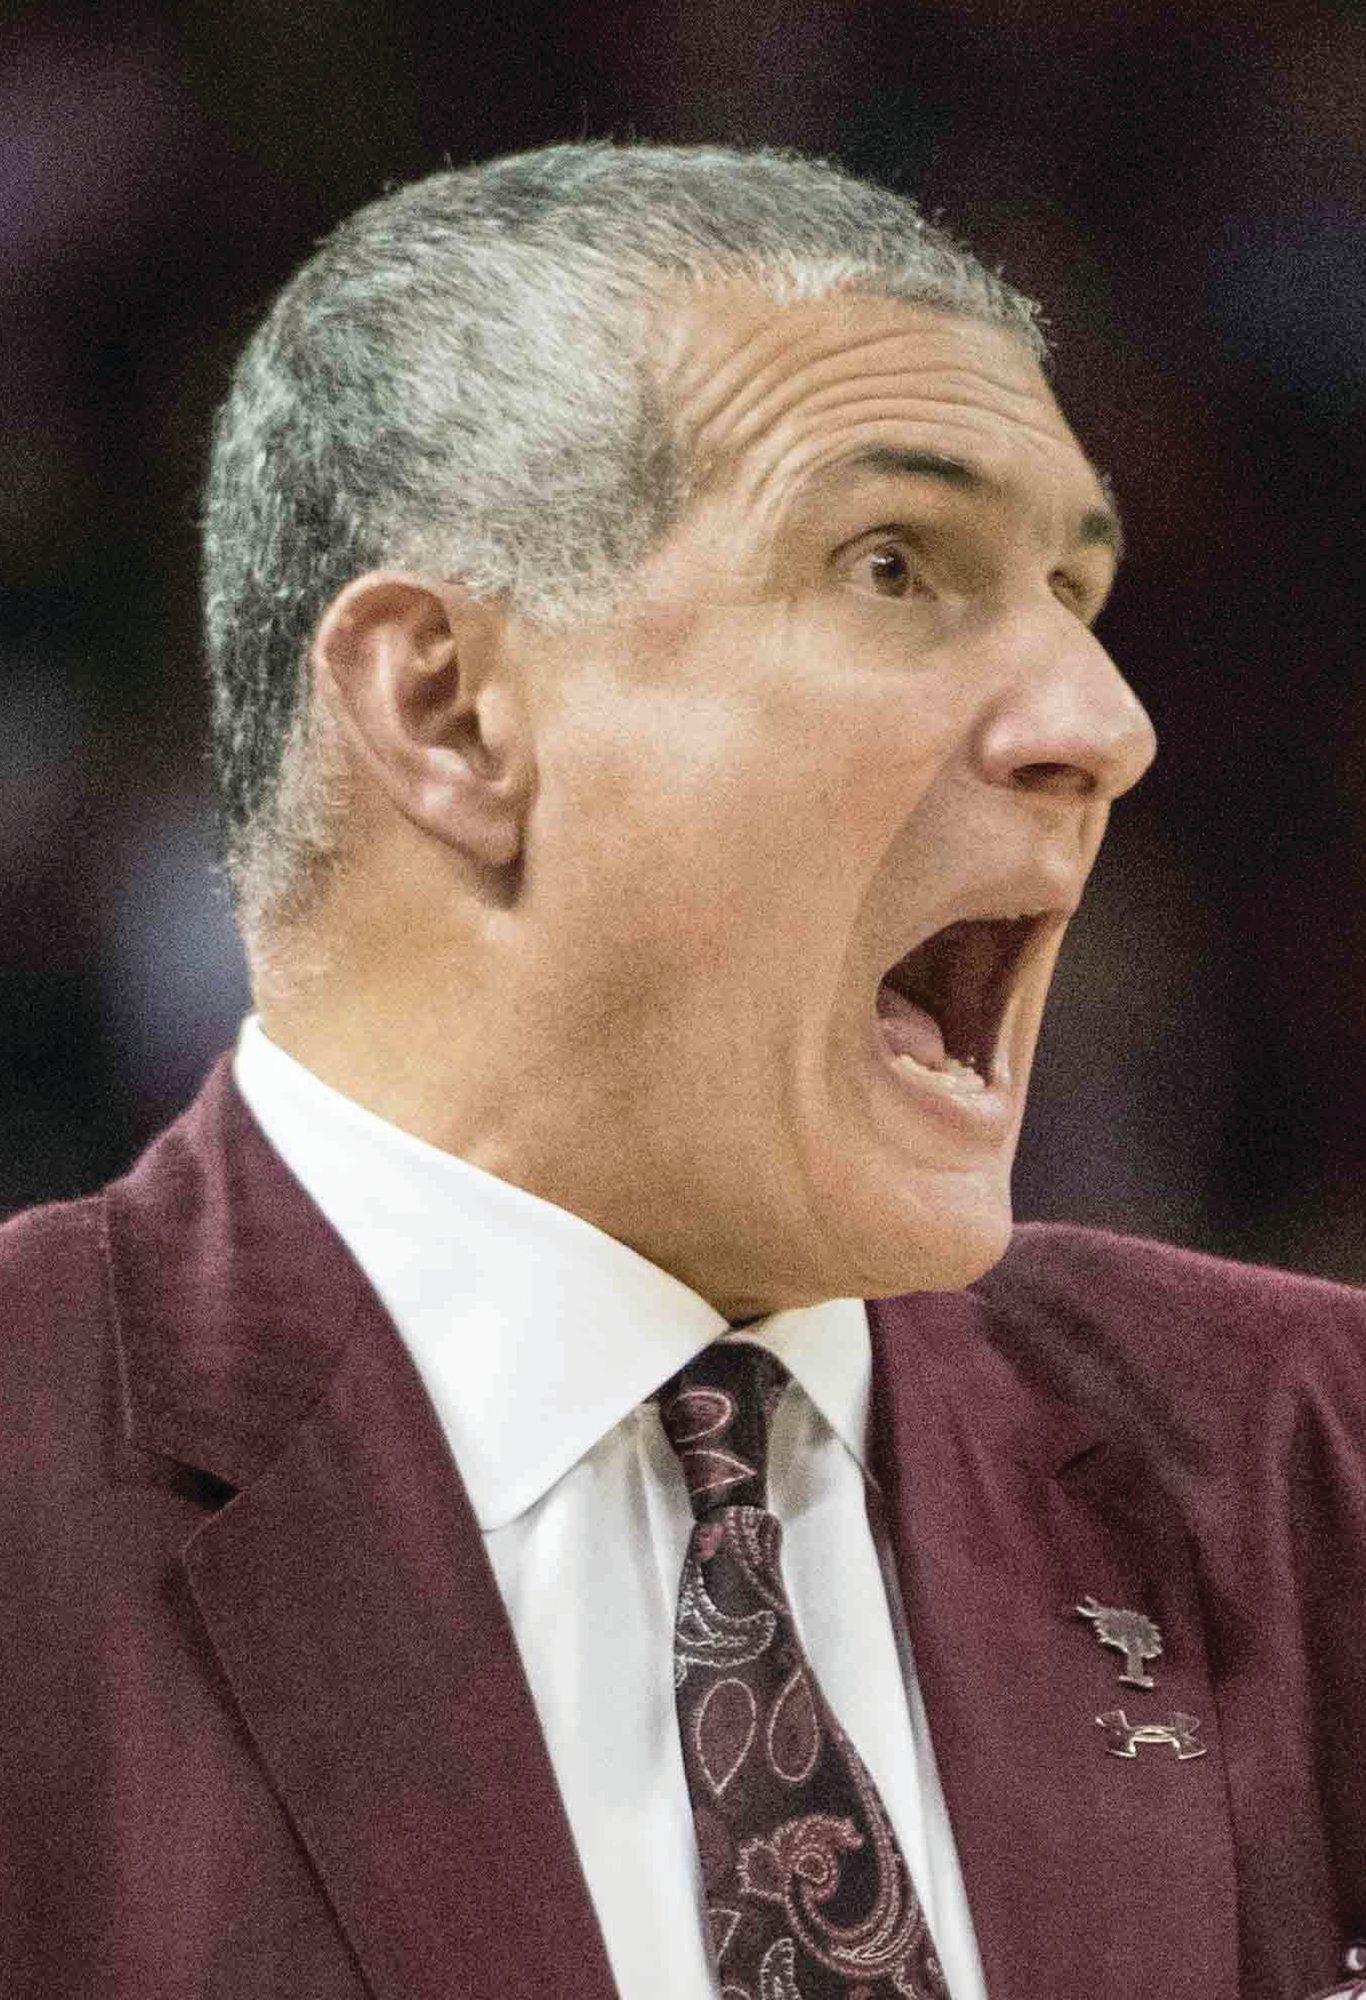 South Carolina head coach Frank Martin and the Gamecocks fell to Boston College 78-70 on Tuesday.